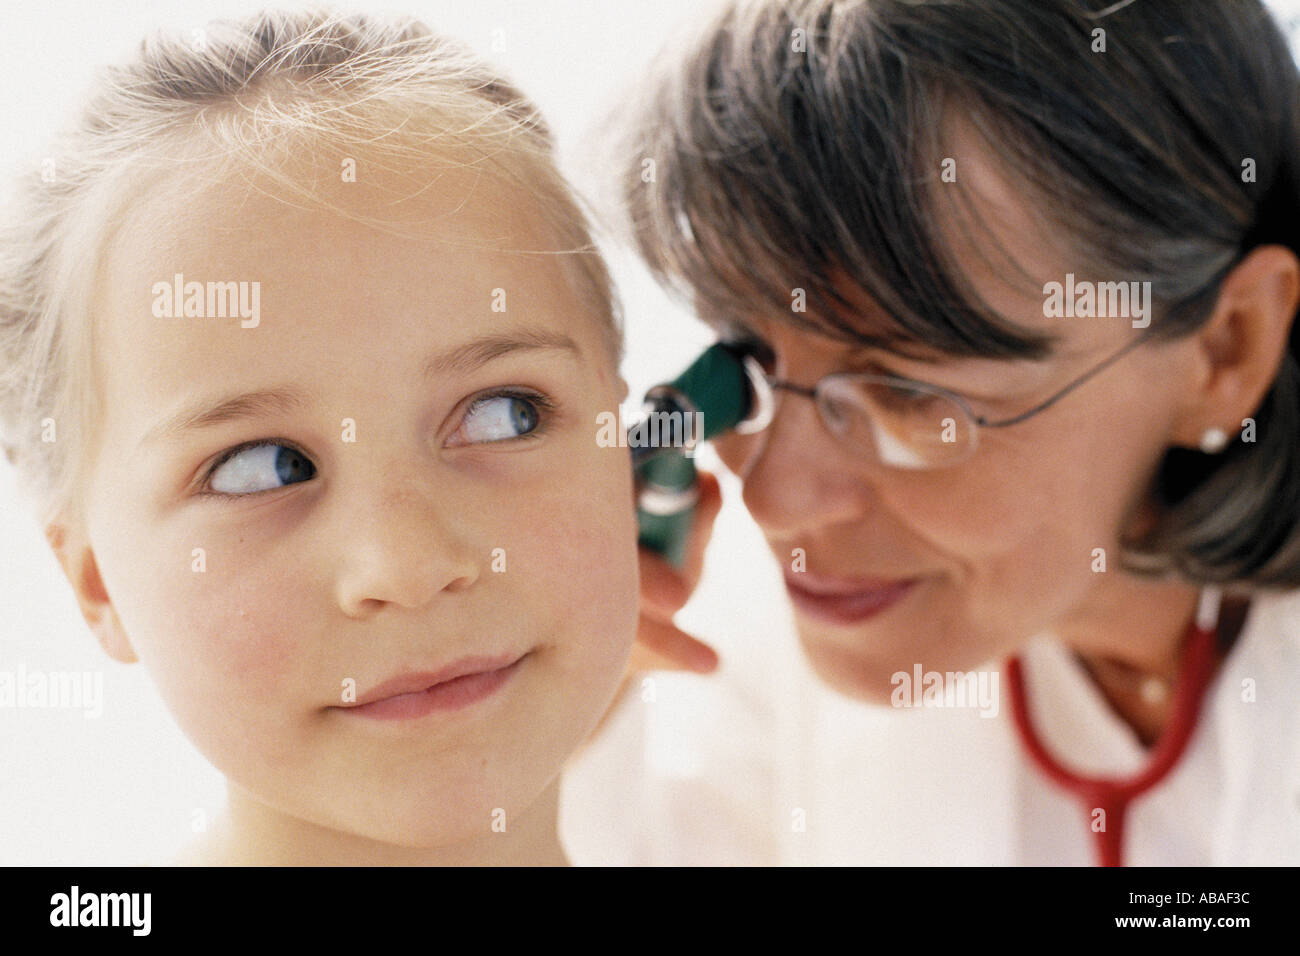 Girl being examined by doctor Stock Photo